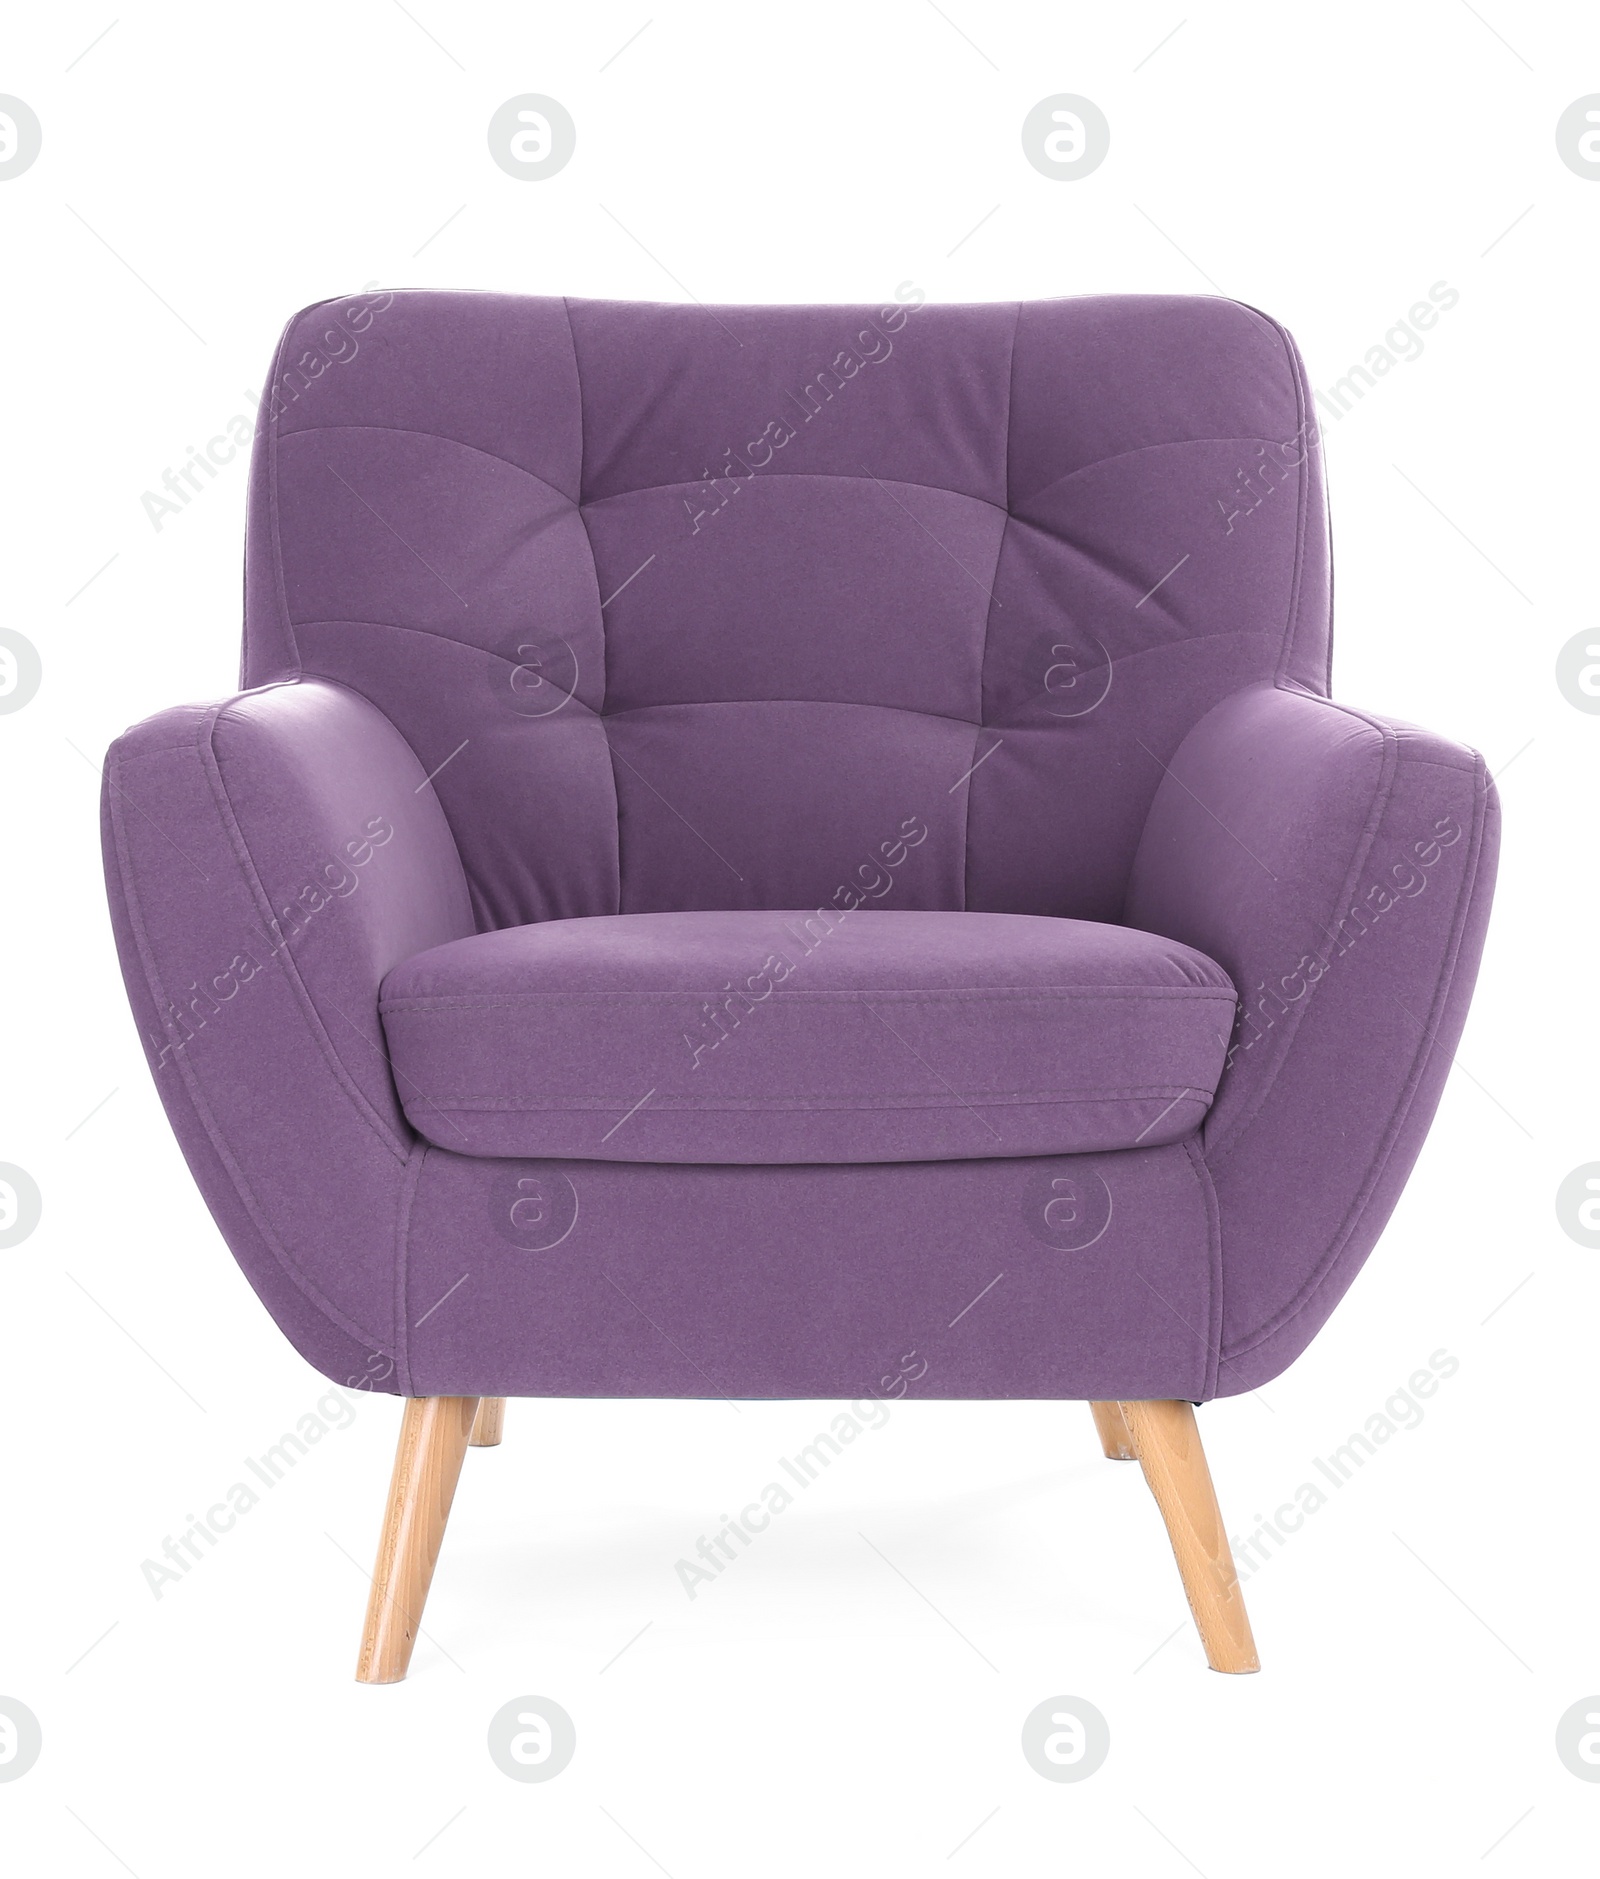 Image of One comfortable dusty purple armchair isolated on white